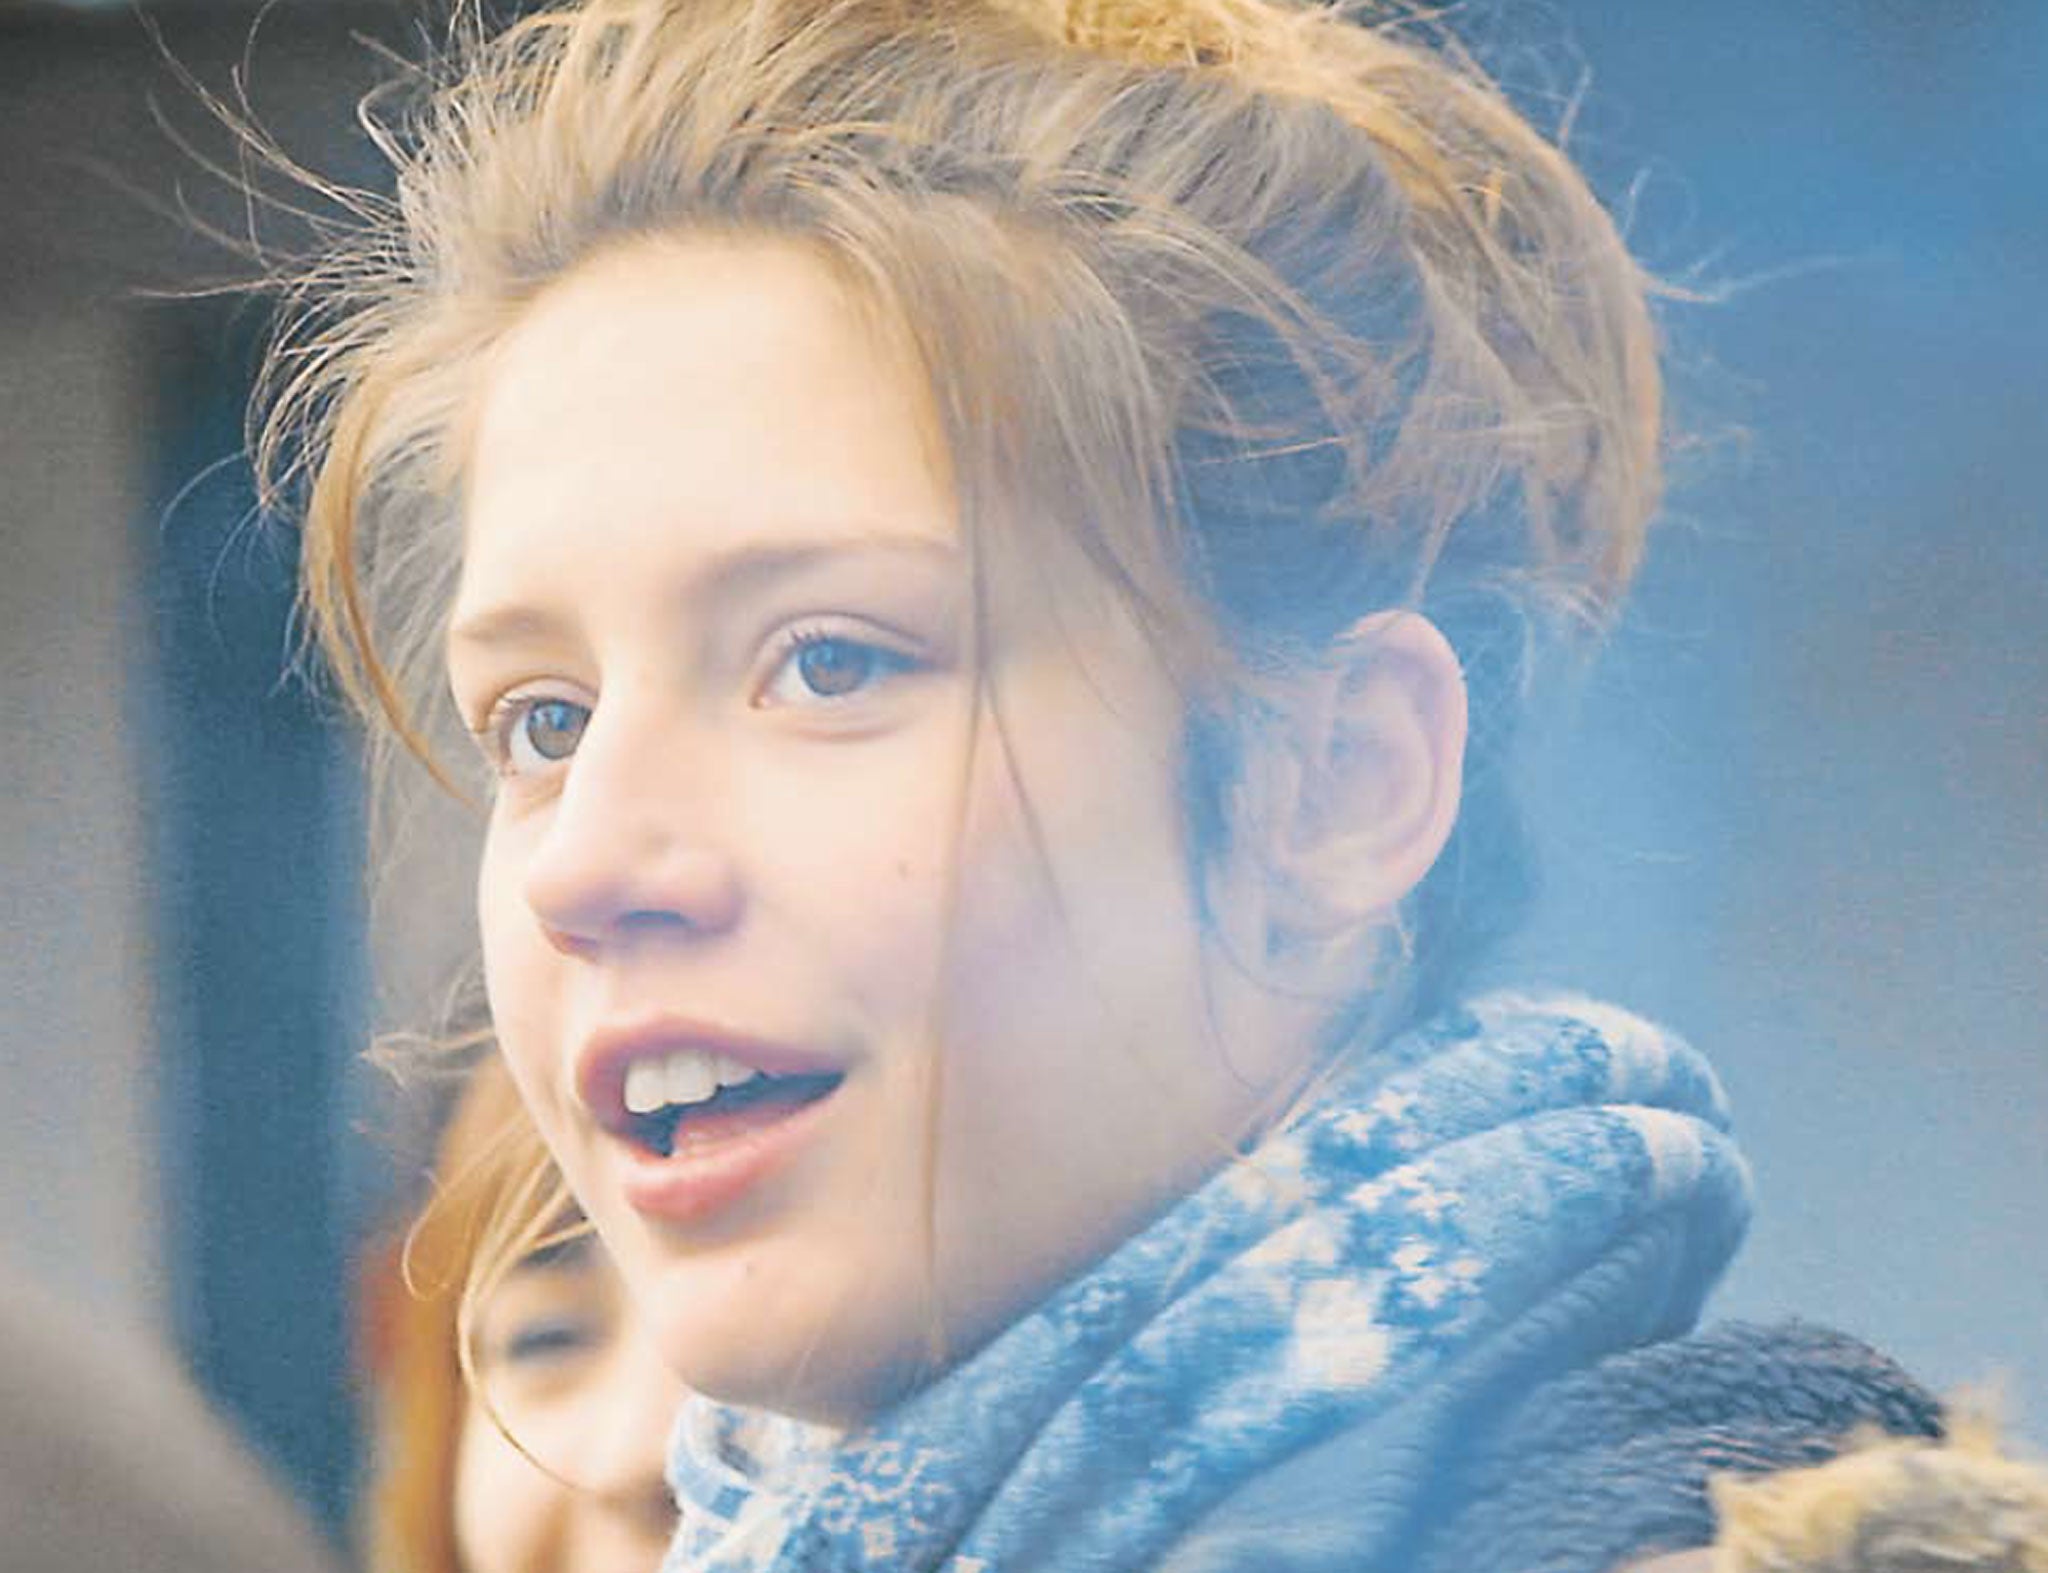 The look of love: Adèle Exarchopoulos stars in the drama ‘Blue Is the Warmest Colour’